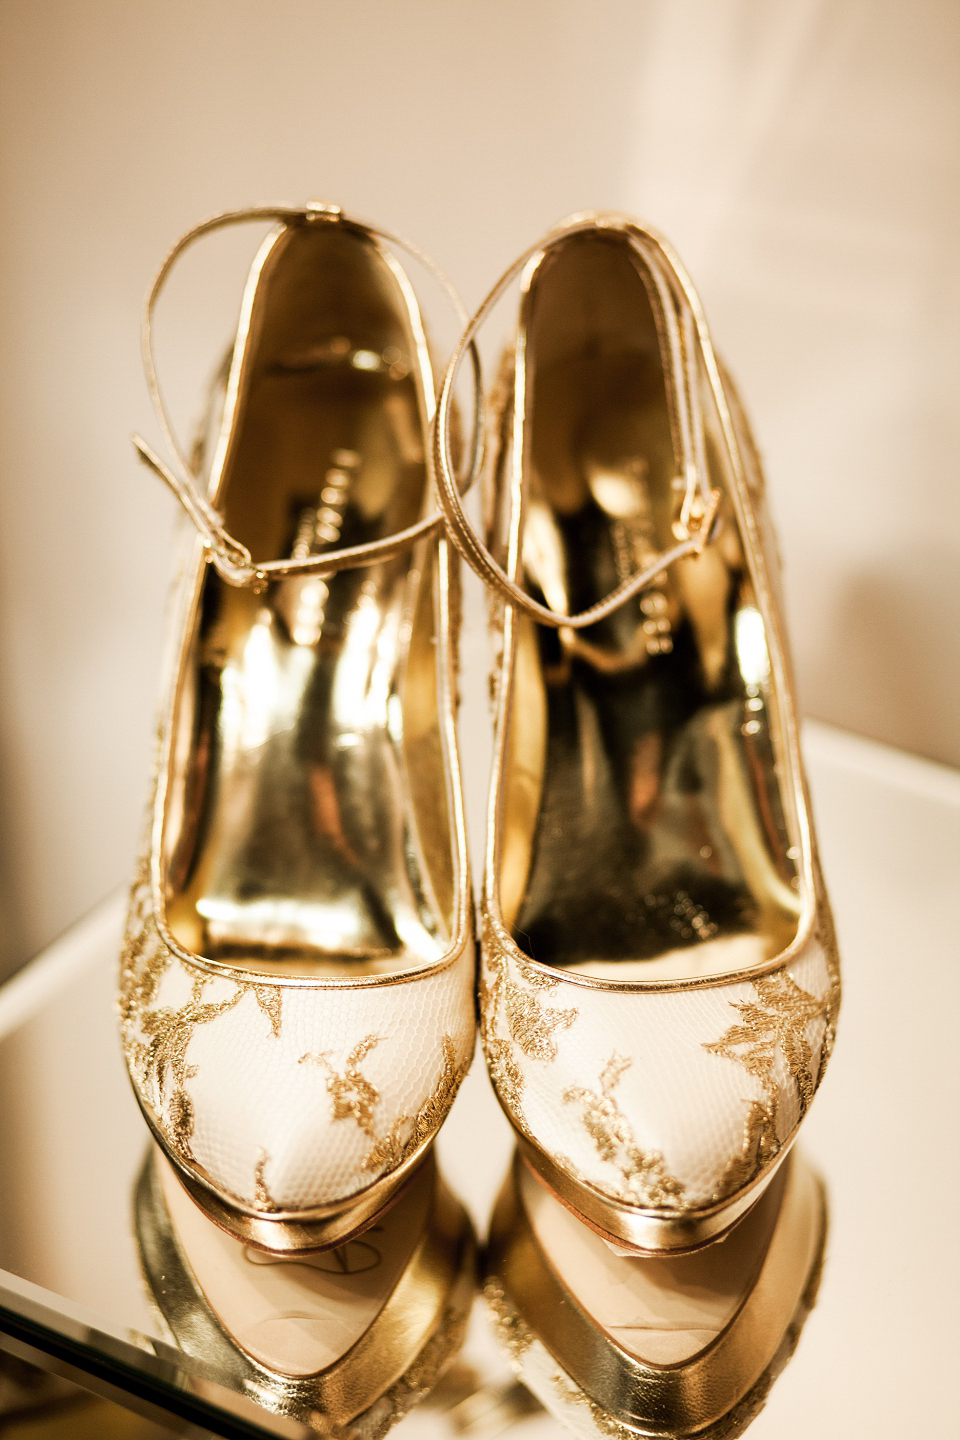 Freya Rose wedding shoes at The White Gallery, London, April 2014